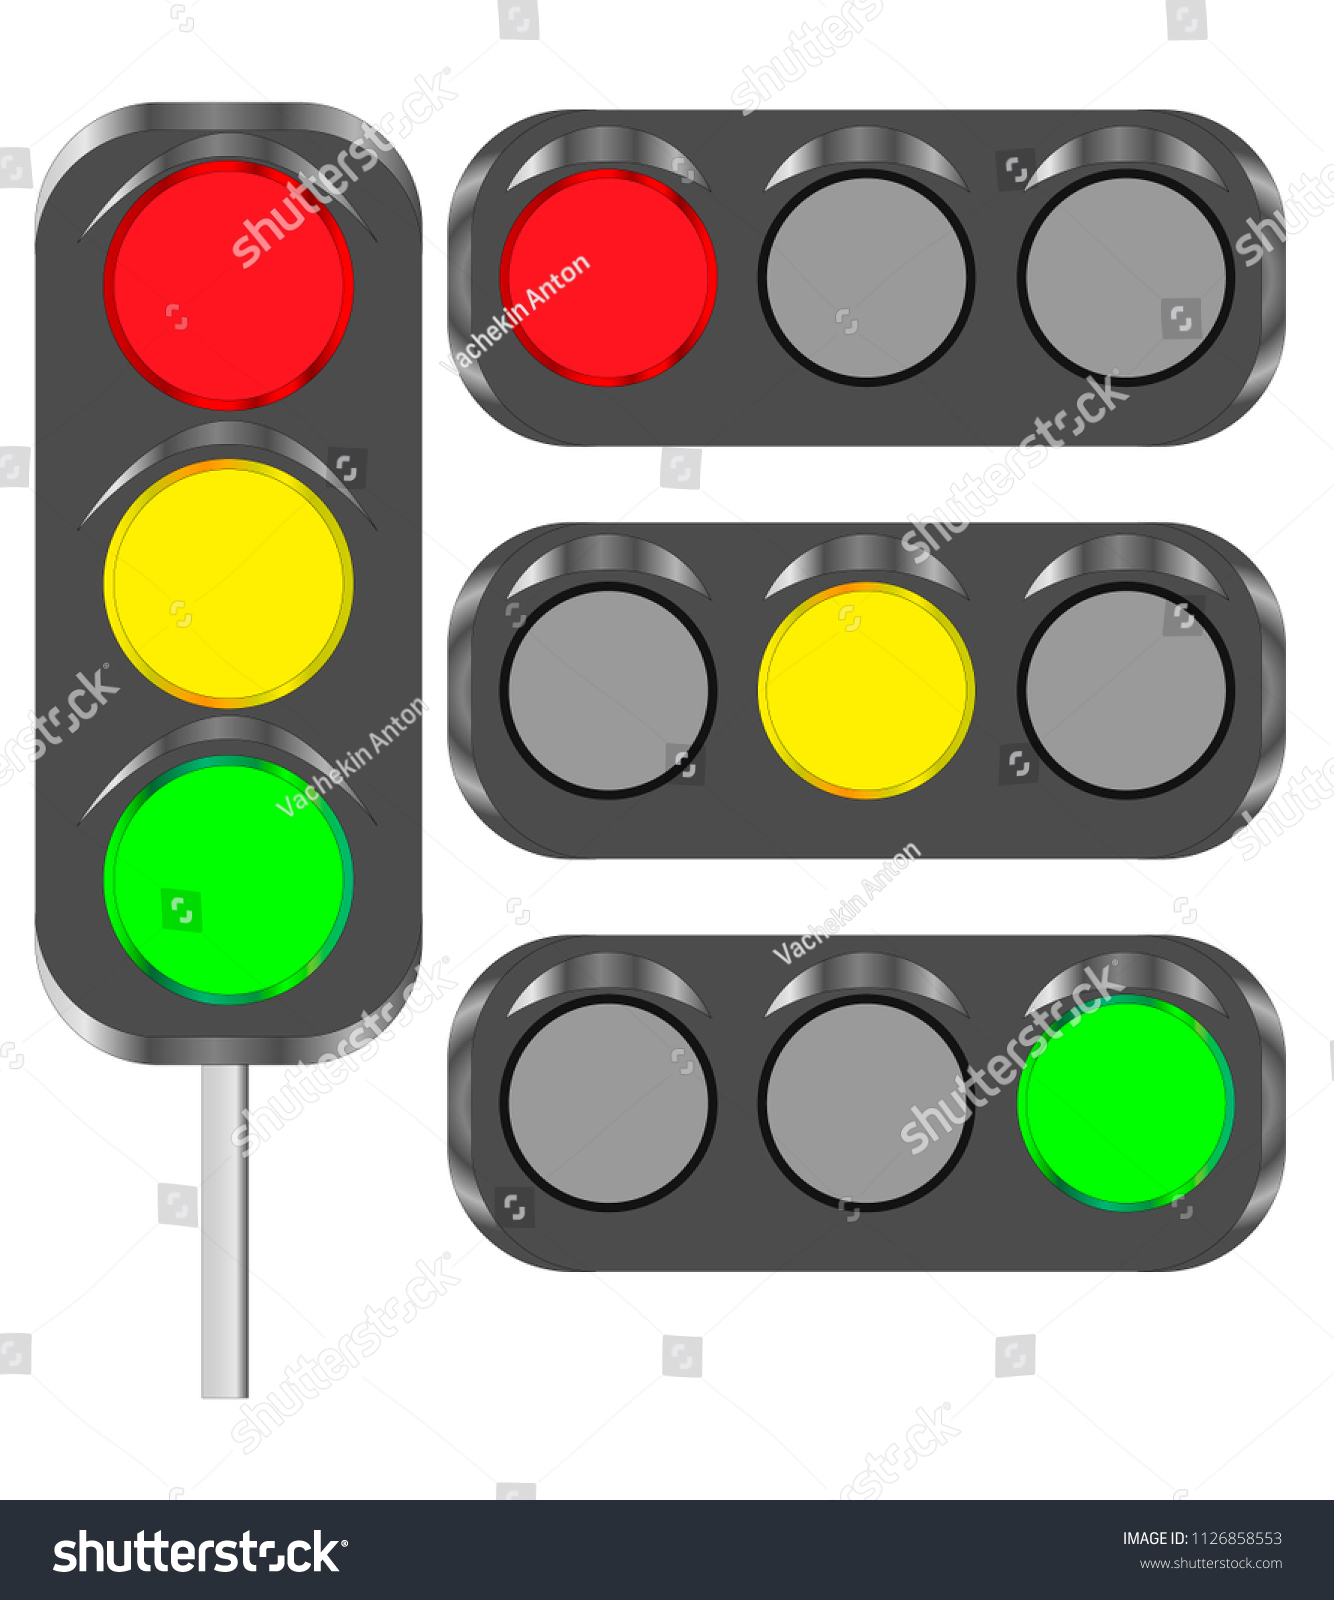 Traffic Light Red Yellow Green Lights Stock Vector Royalty Free